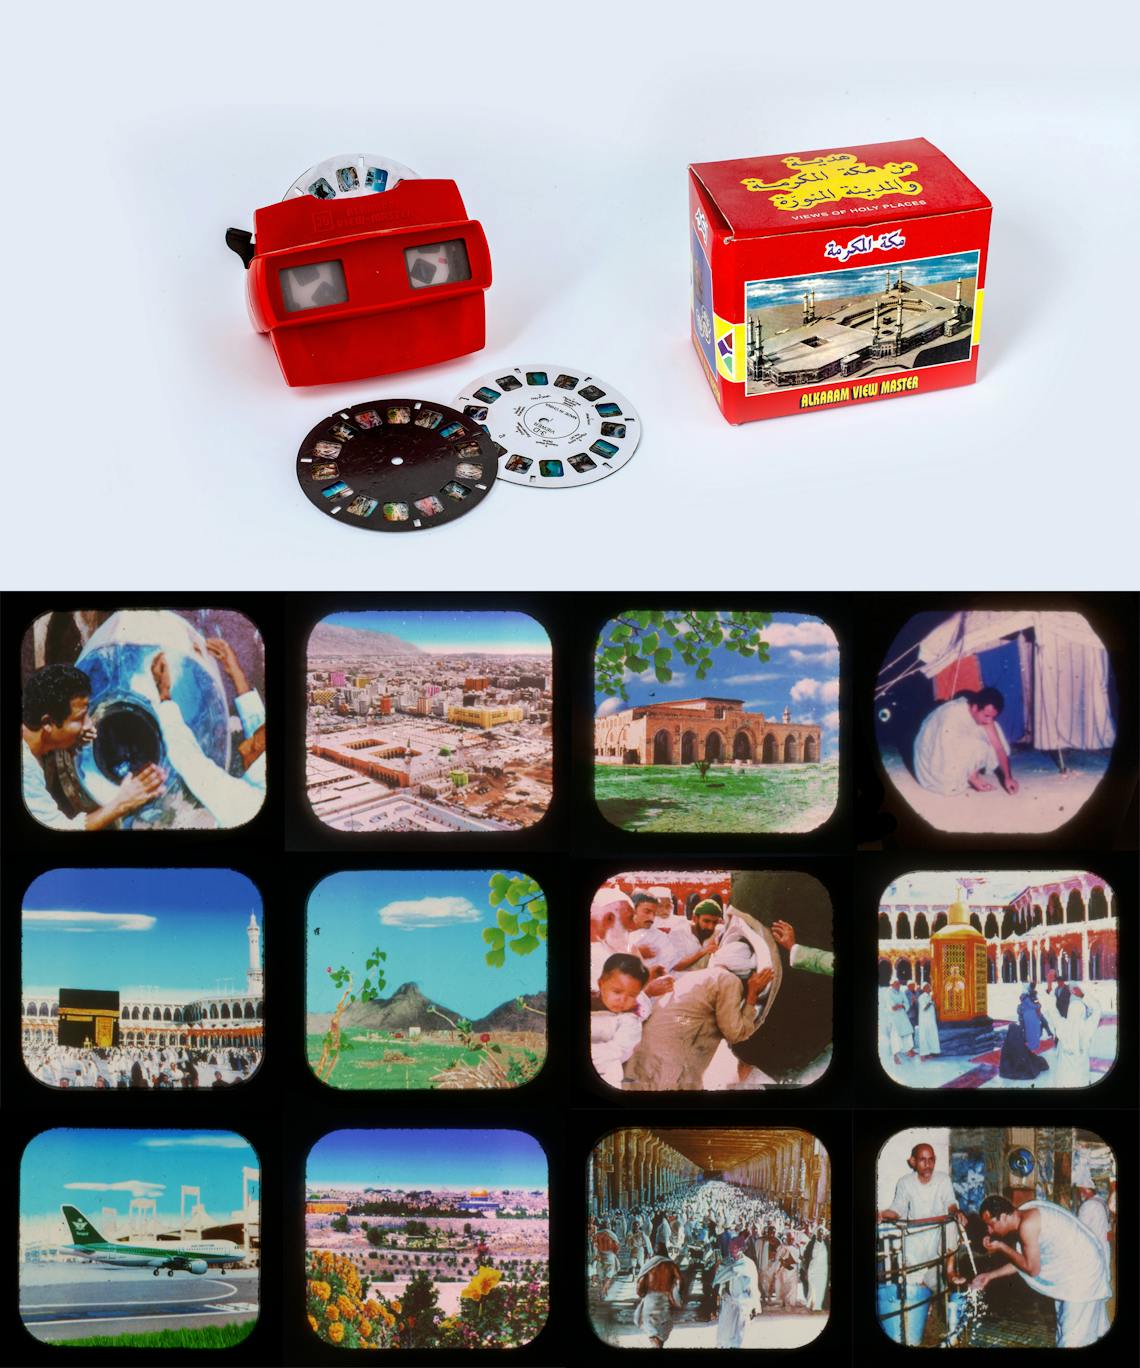 4 View Master Stereoscope III 100 found0pjects